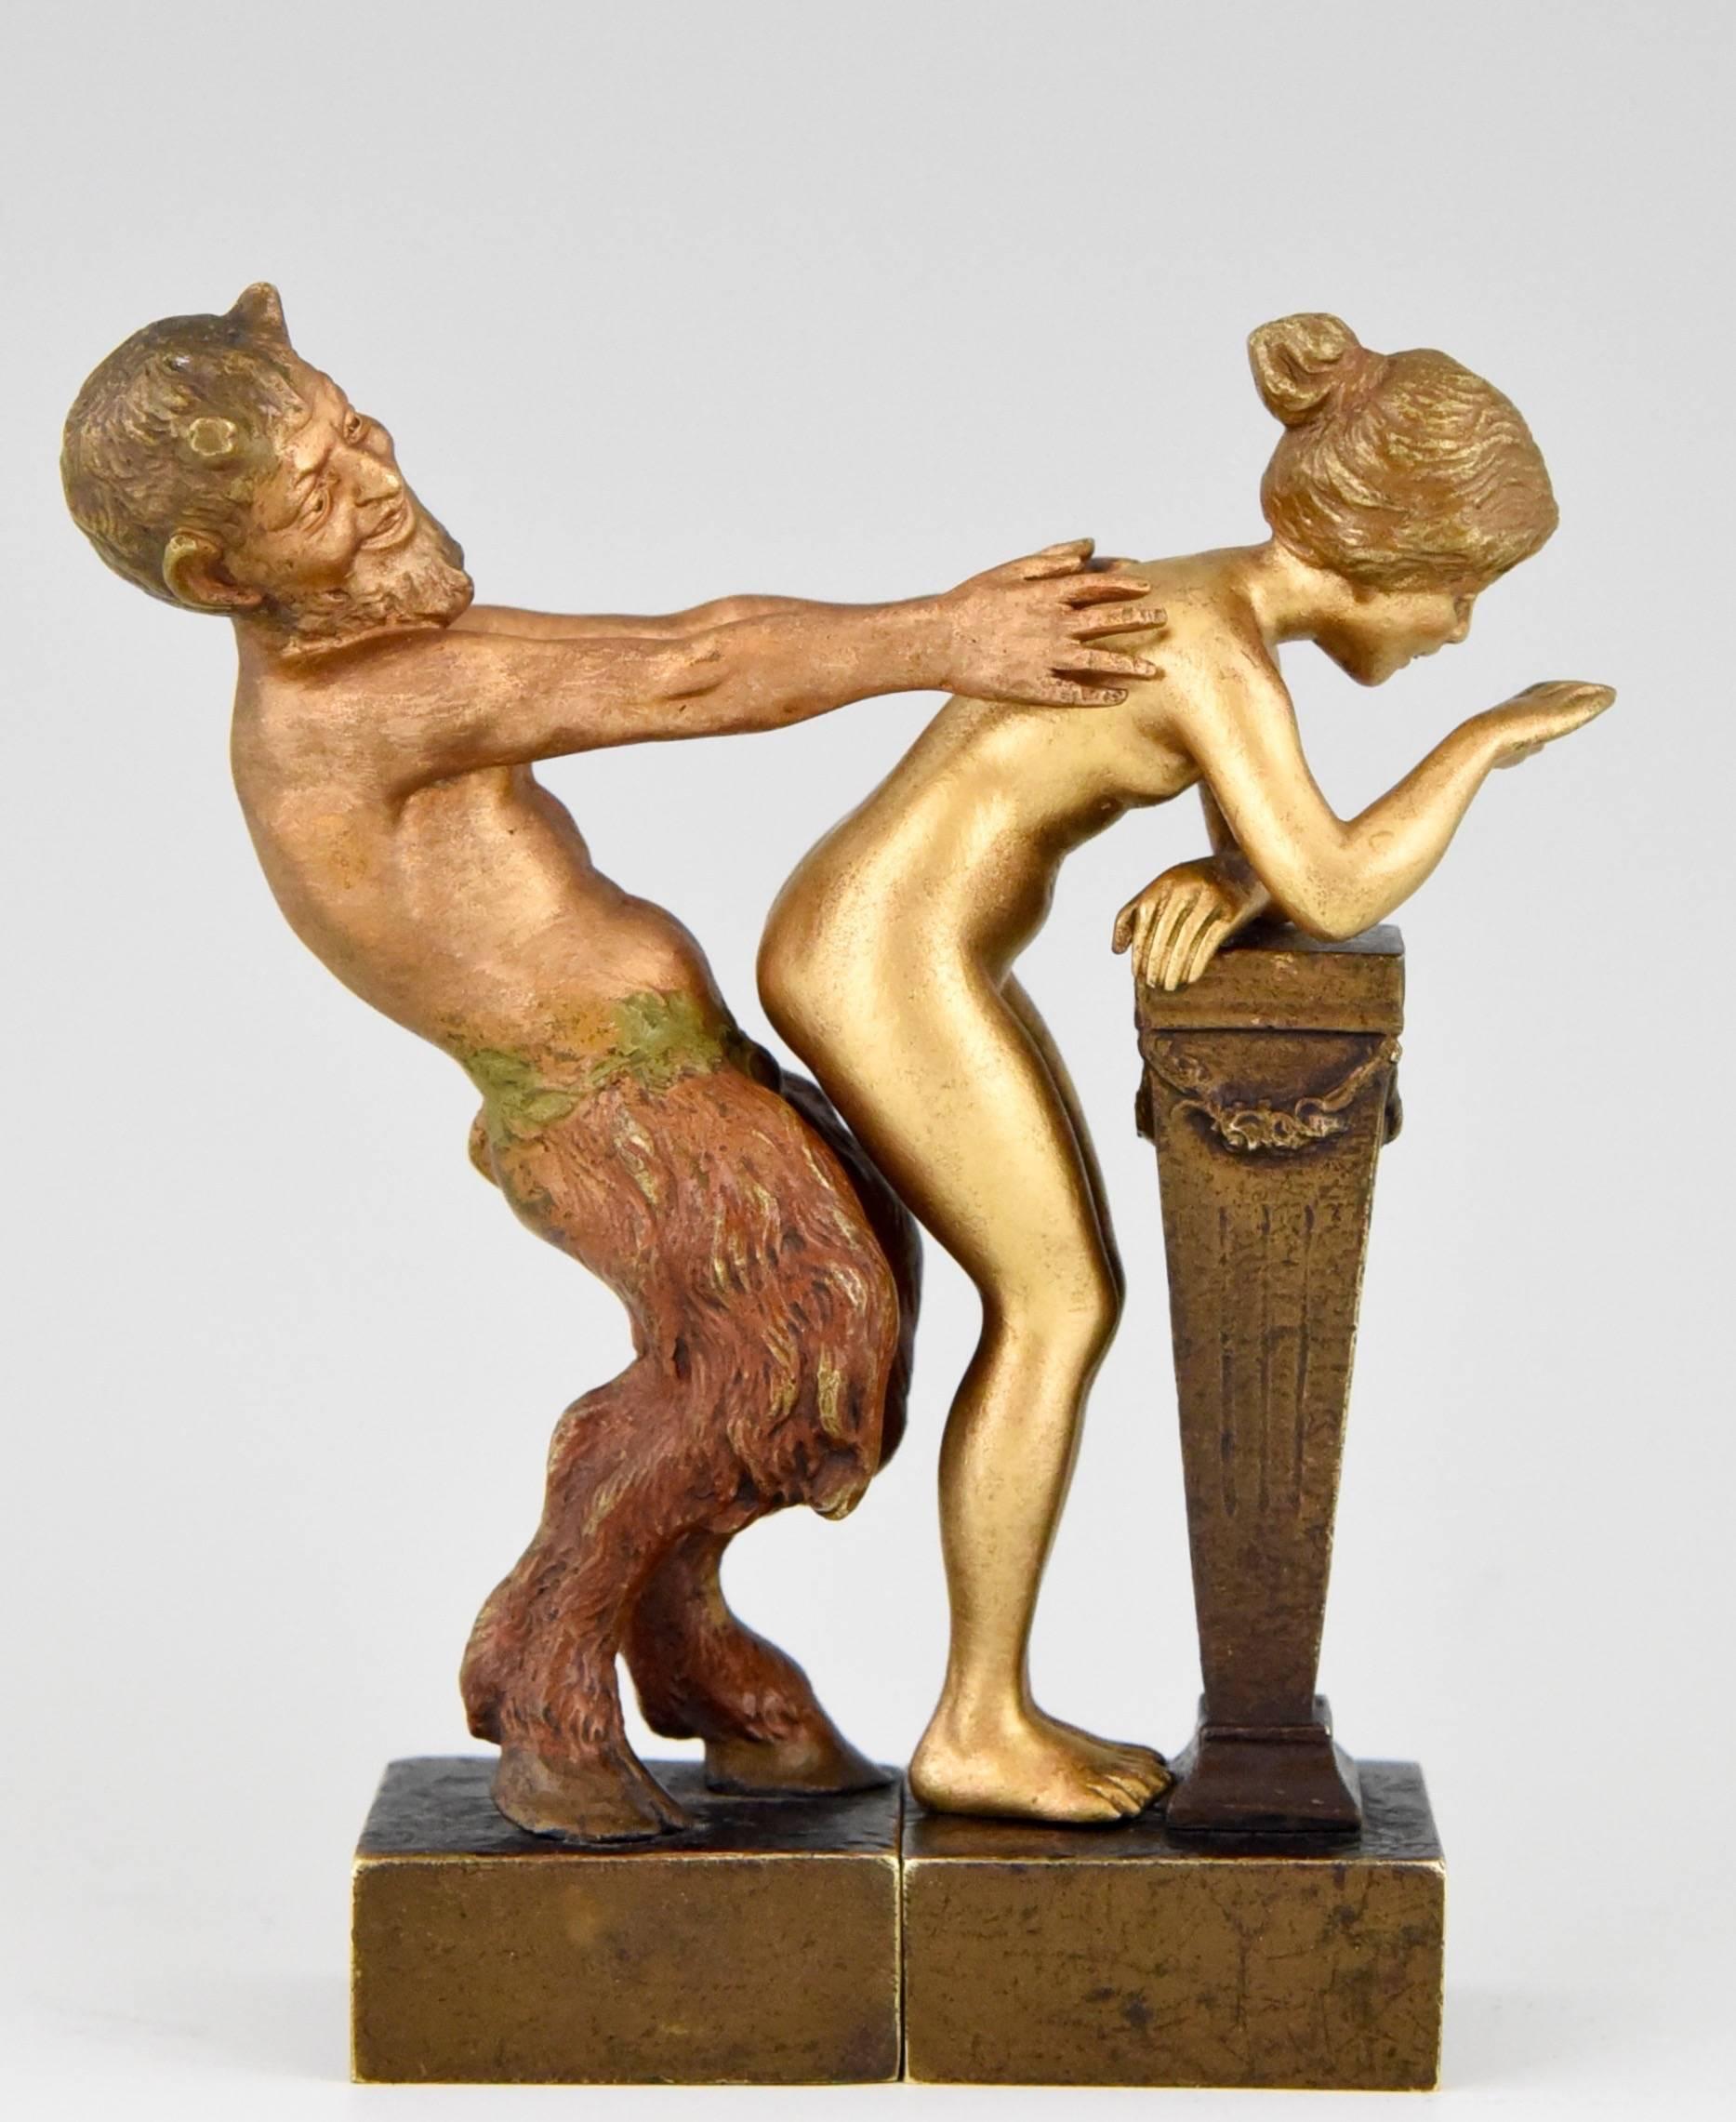 Description: A pair erotic Vienna bronzes, nymph and satyr. Artist/ Maker: Bergman. Marks: Both marked B in a vase. Style: Erotic. Date: 1910. Material: Cold painted bronze. Origin: Austria. Size of one: H 11. 5 cm x L 5,5 cm. x W 3.3 cm. H 4.5 inch